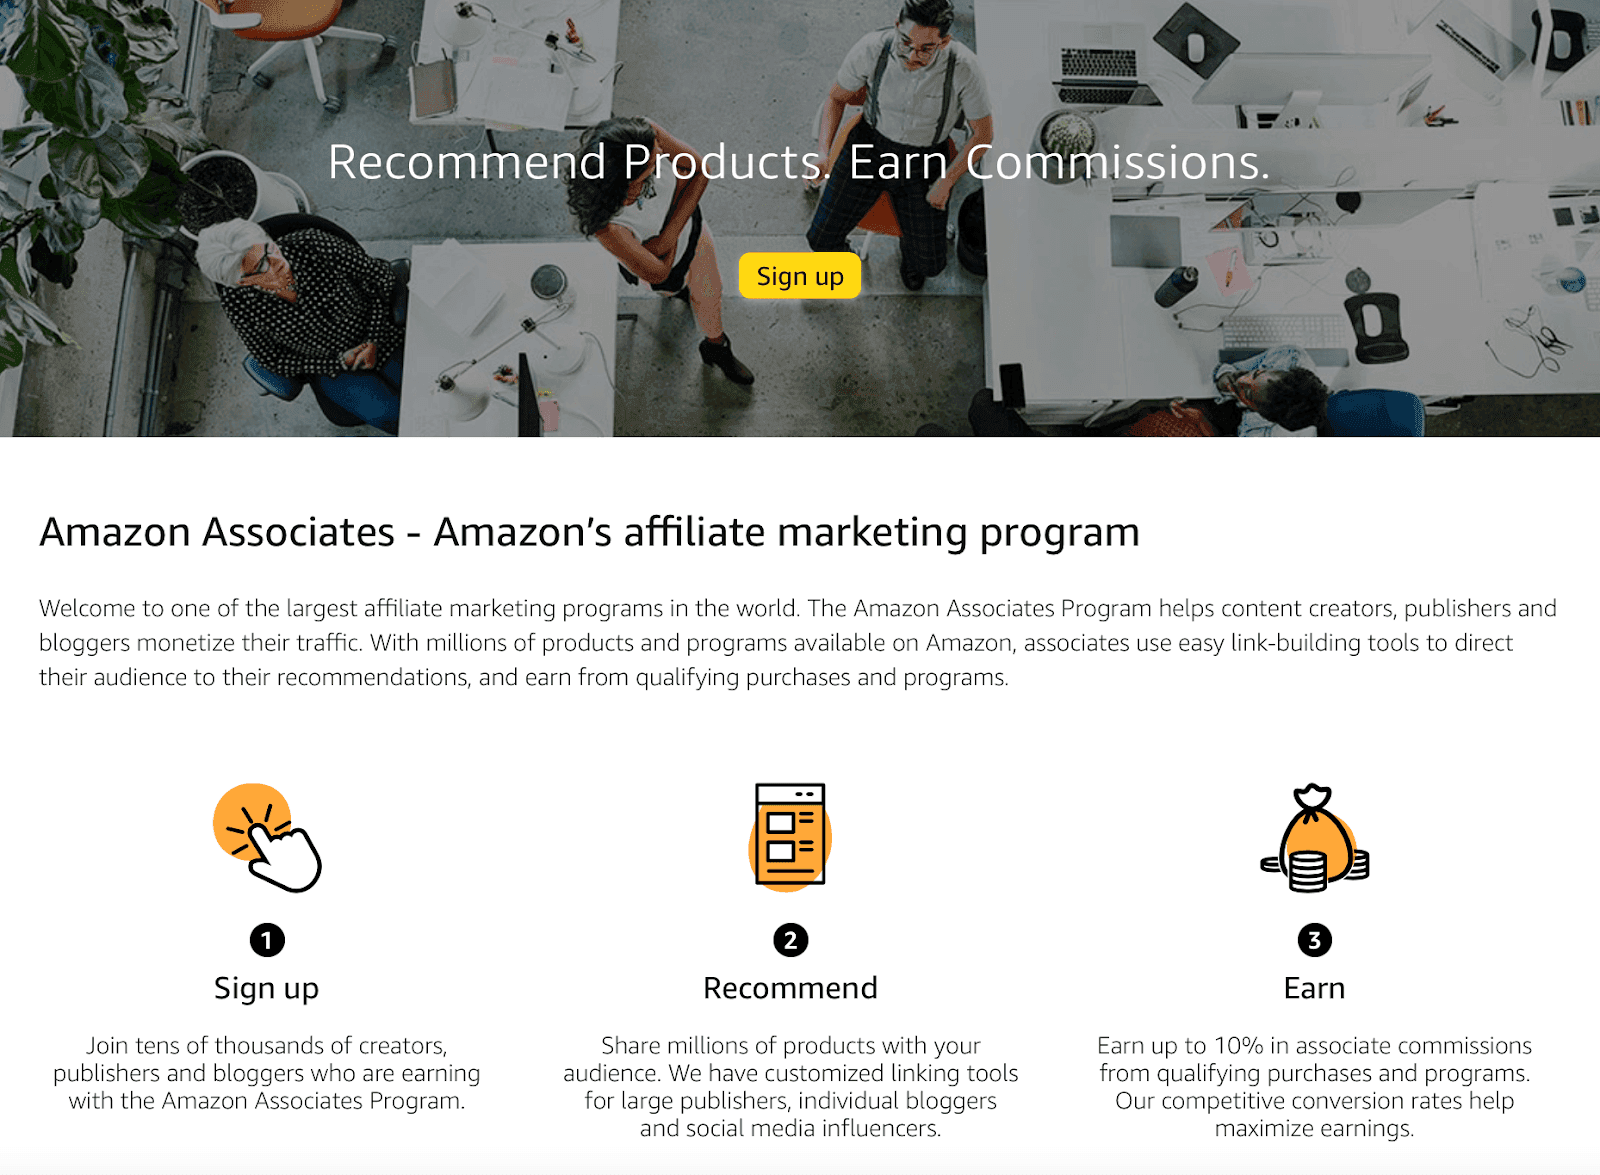 Instructions on how to sign up for Amazon's affiliate marketing program.